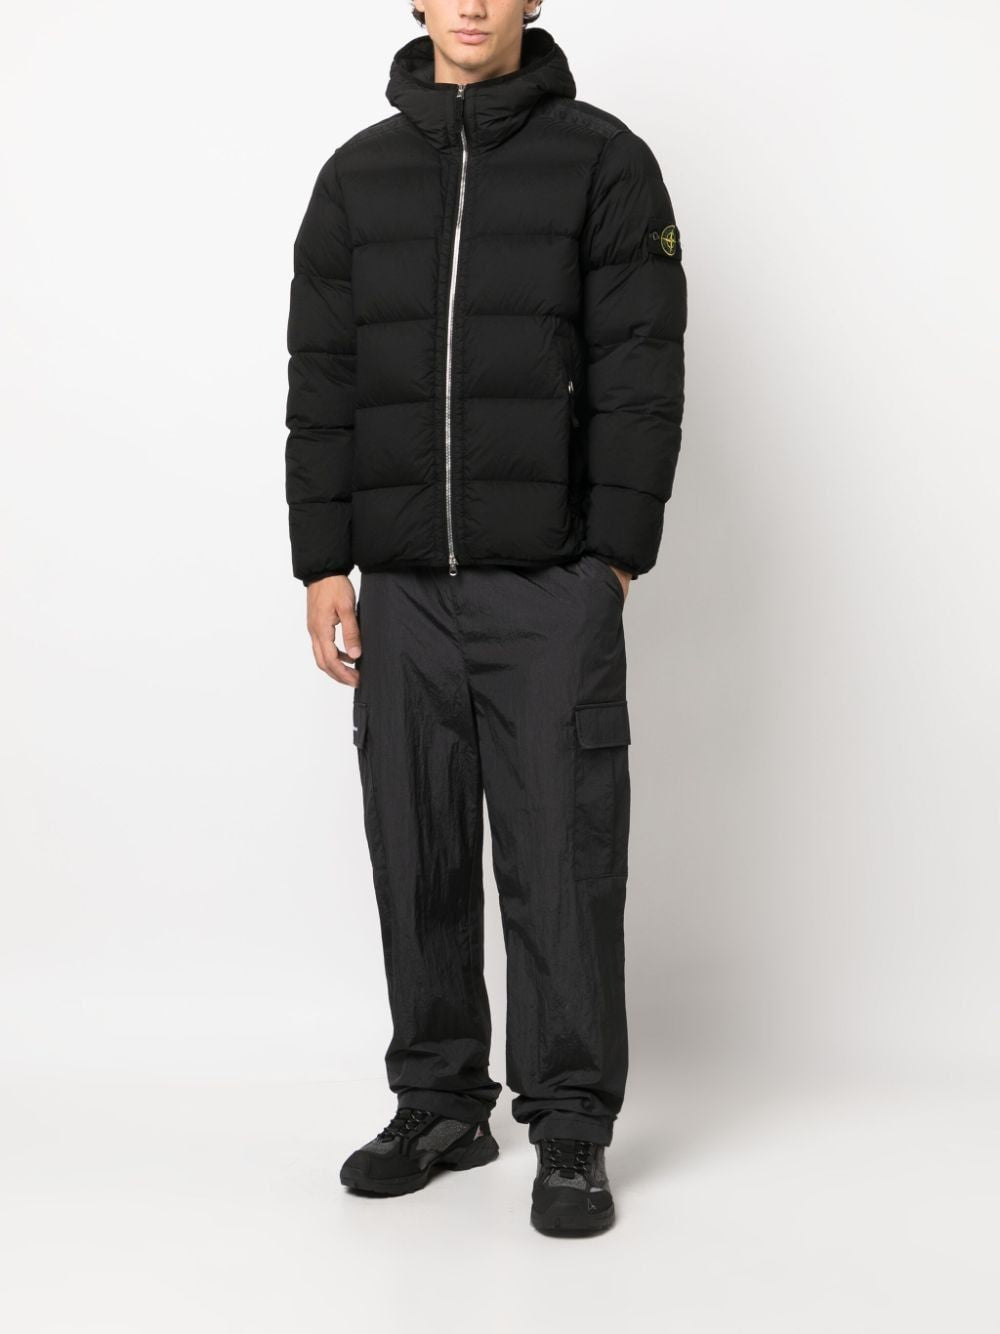 Black Nylon Down Hooded Jacket for Men - FW23 Collection